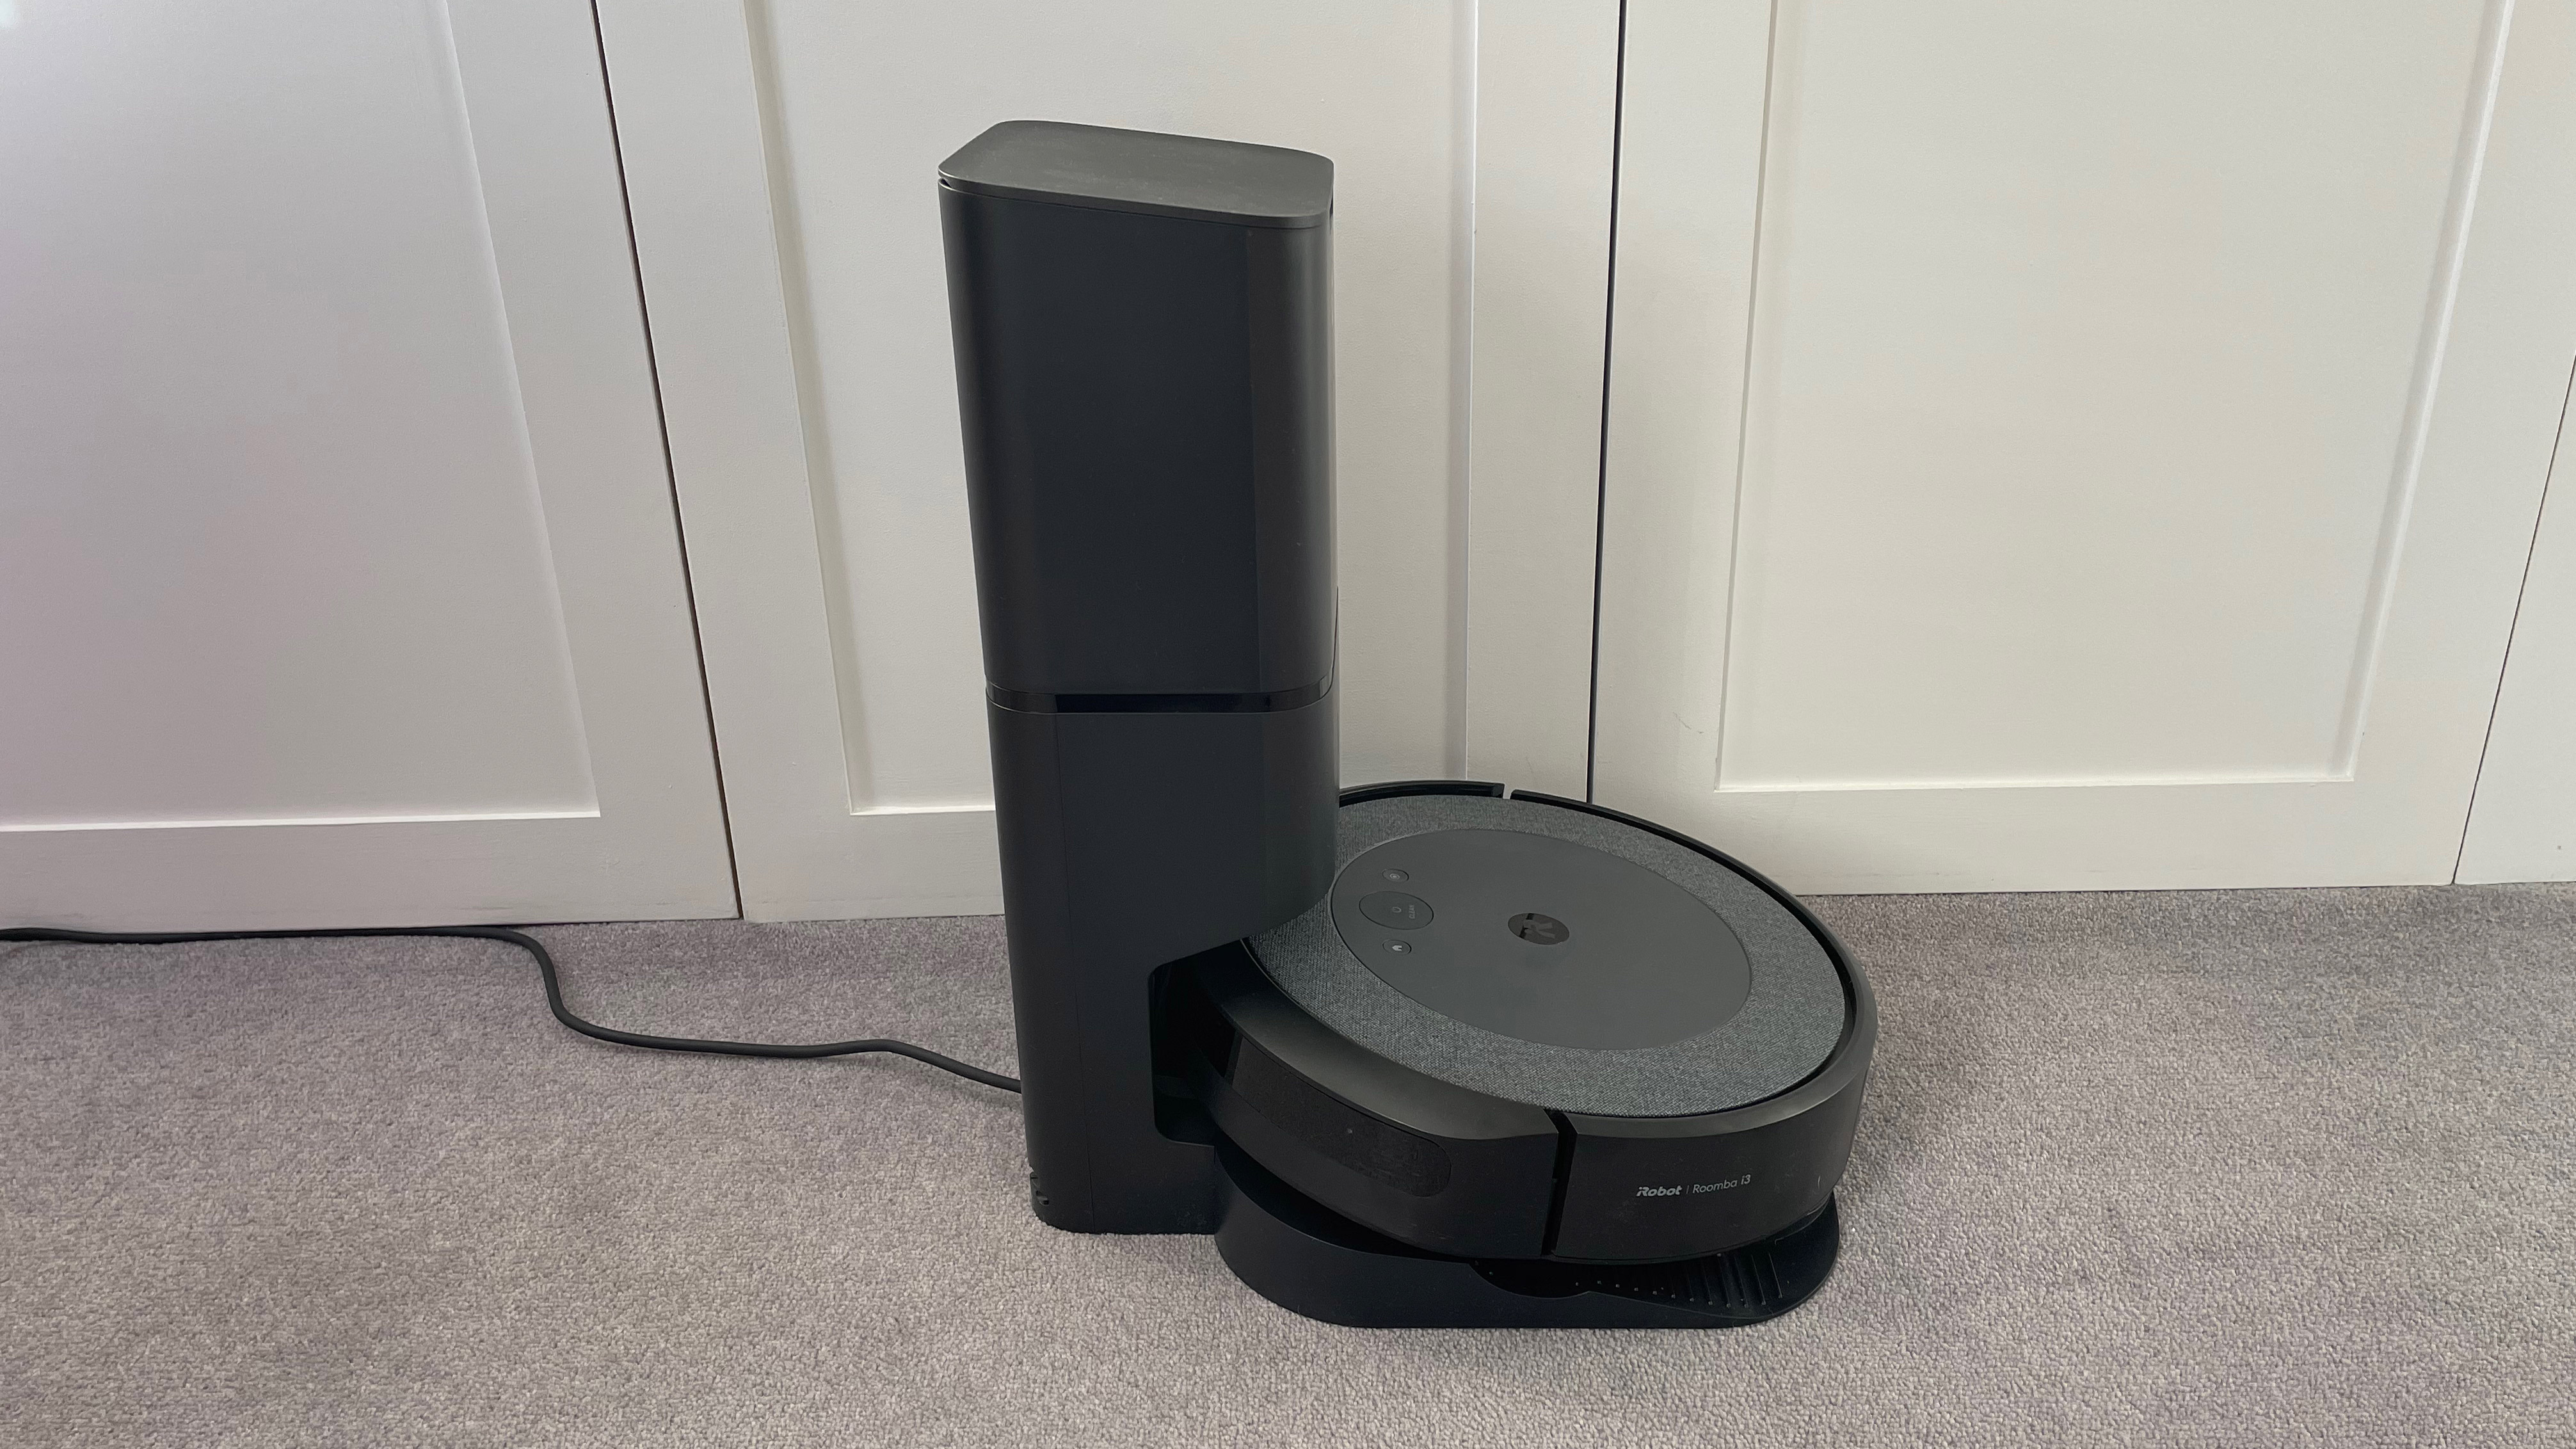 The side view of the iRobot Roomba i3 Plus on its charging base